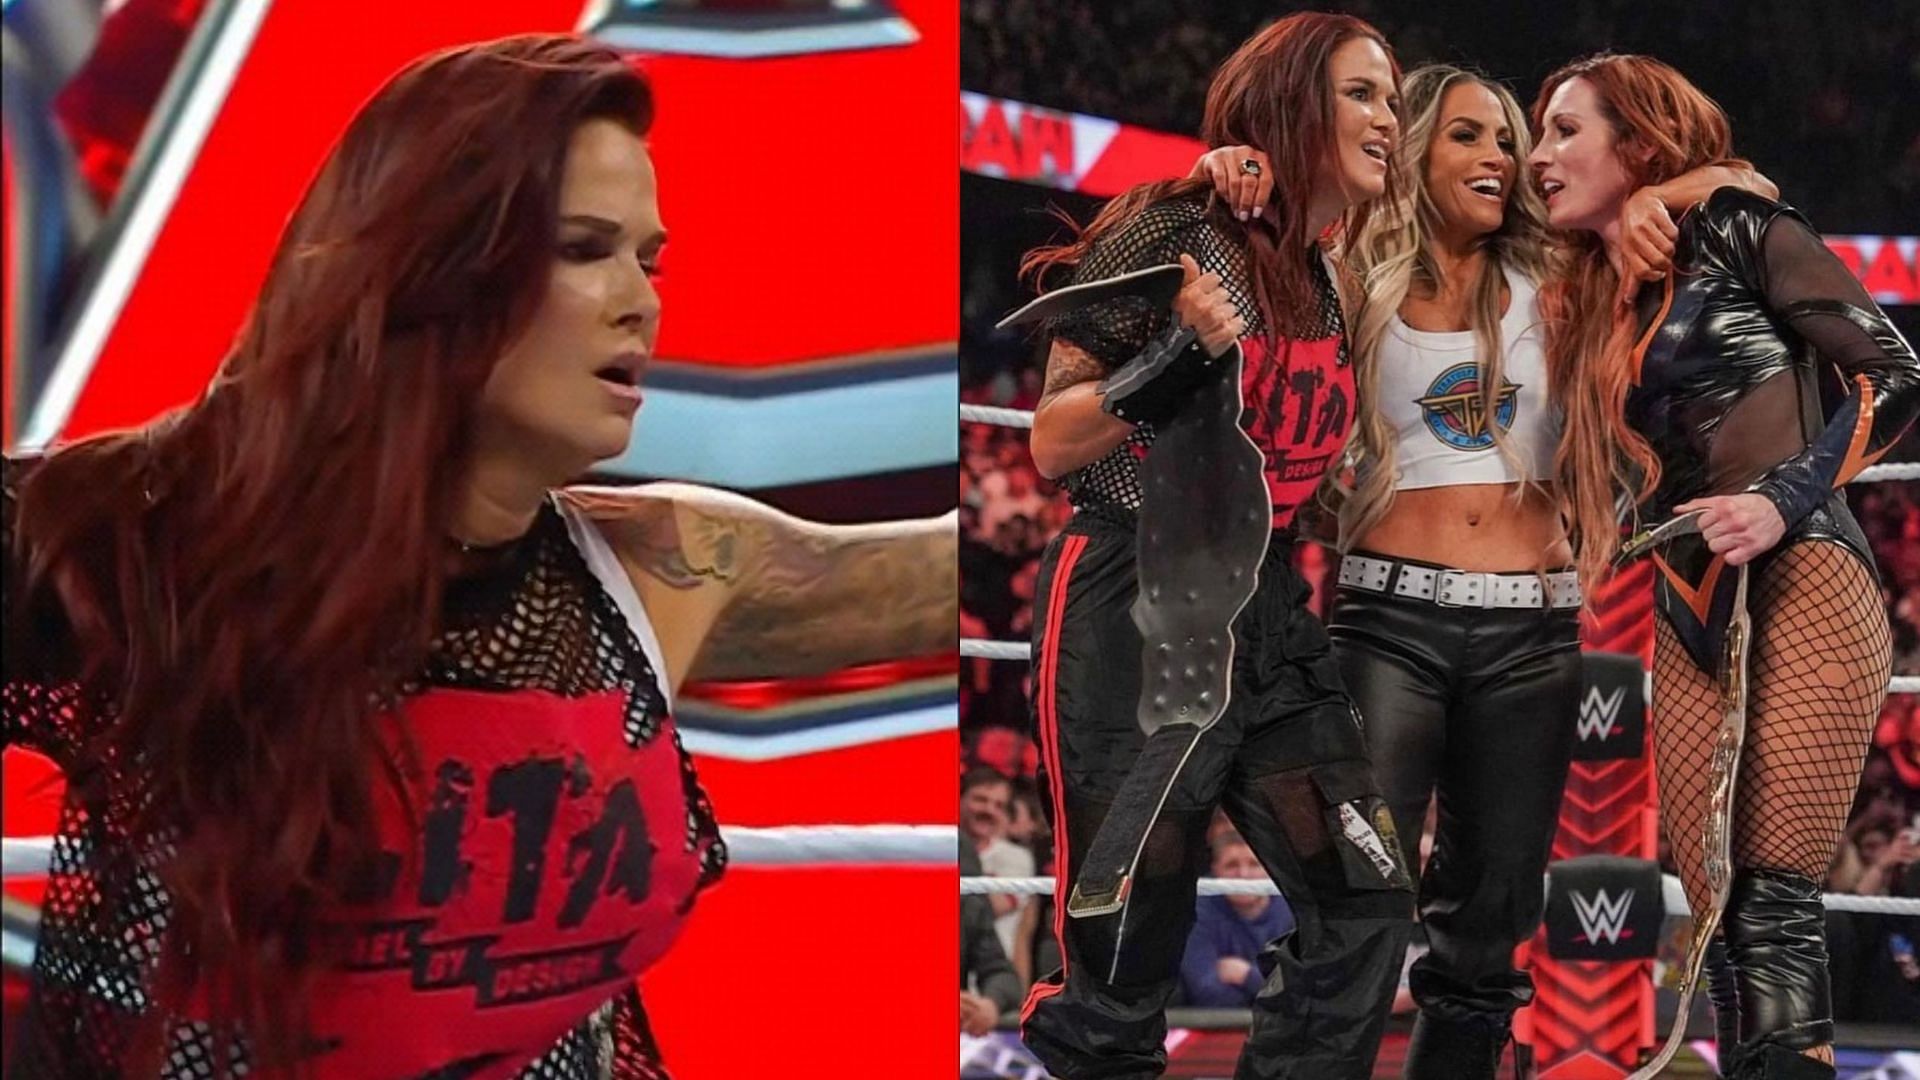 Lita reveals she was supposed to win the Women's Title match instead of WWE Hall of Famer